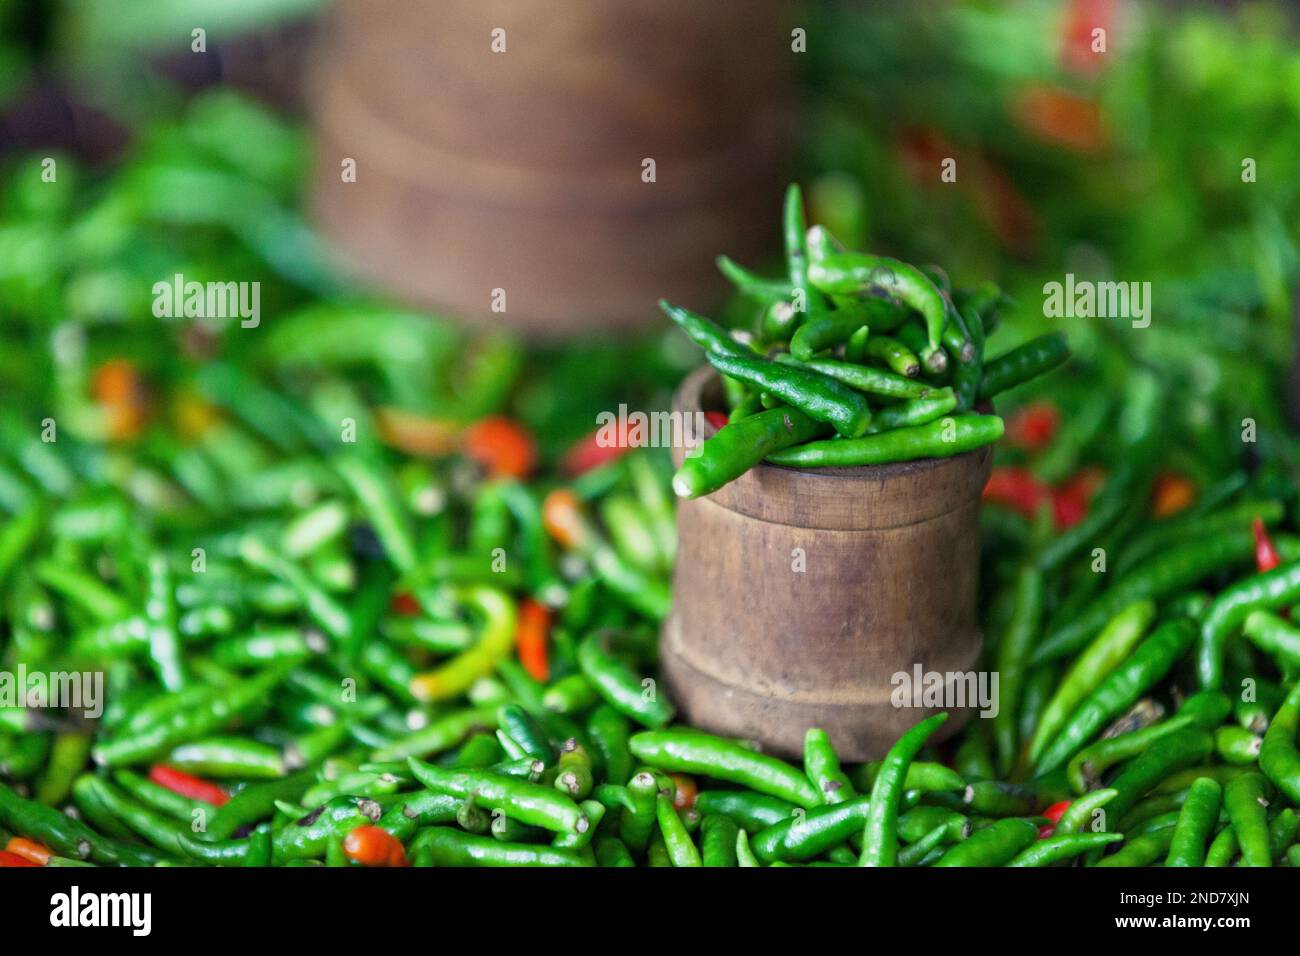 Full frame close-up on a stack of piment oiseau (Capsicum frutescens) on a market stall. Stock Photo